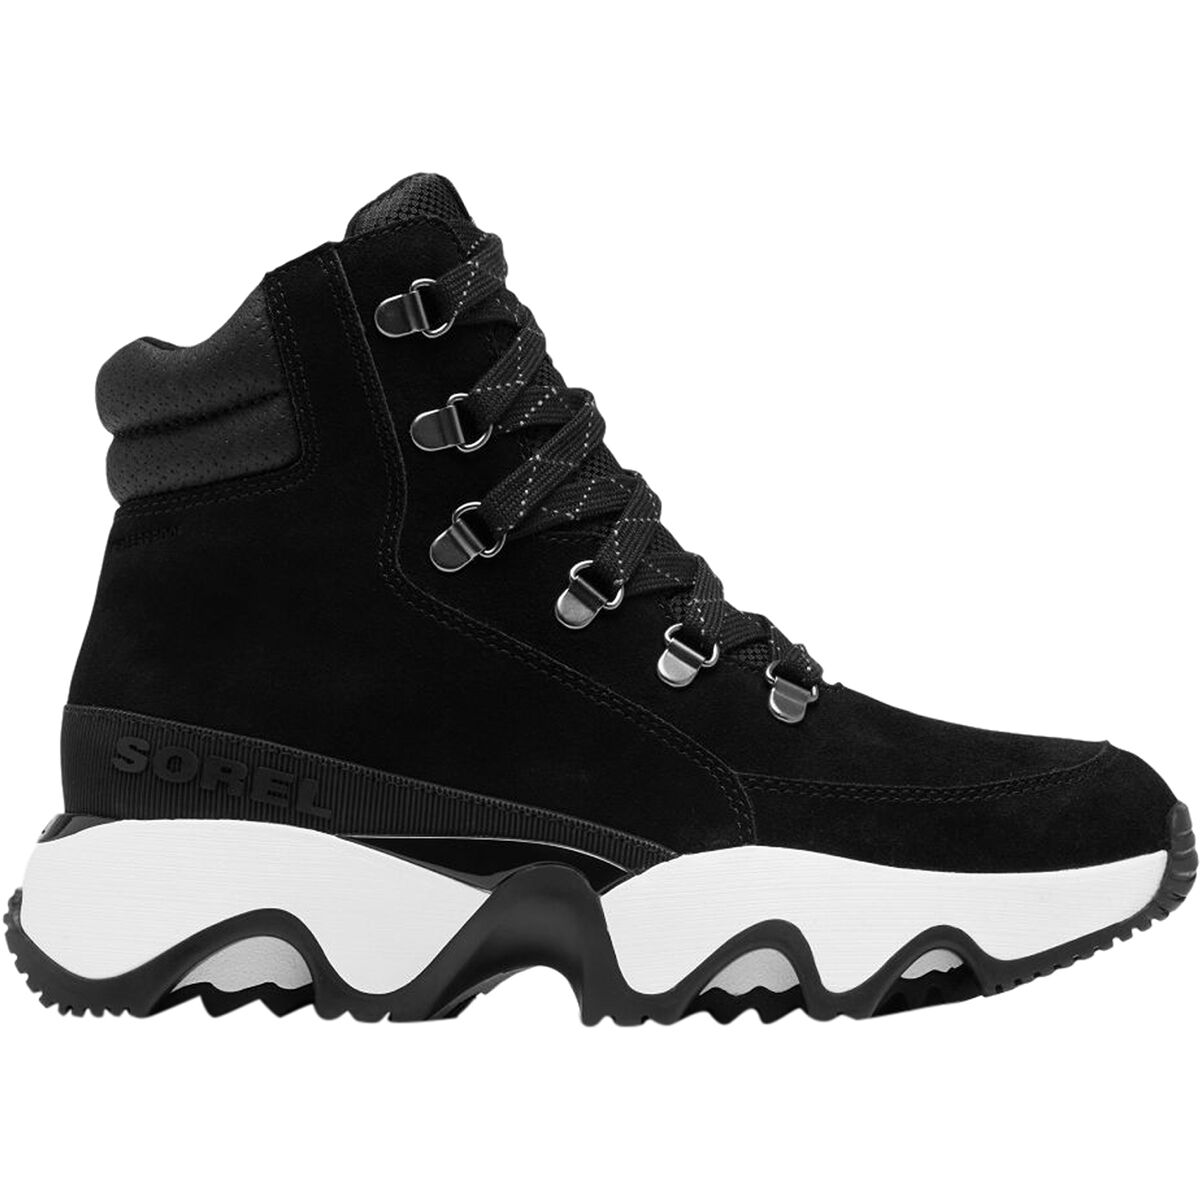 Kinetic Impact Conquest Sneaker Boot - Women